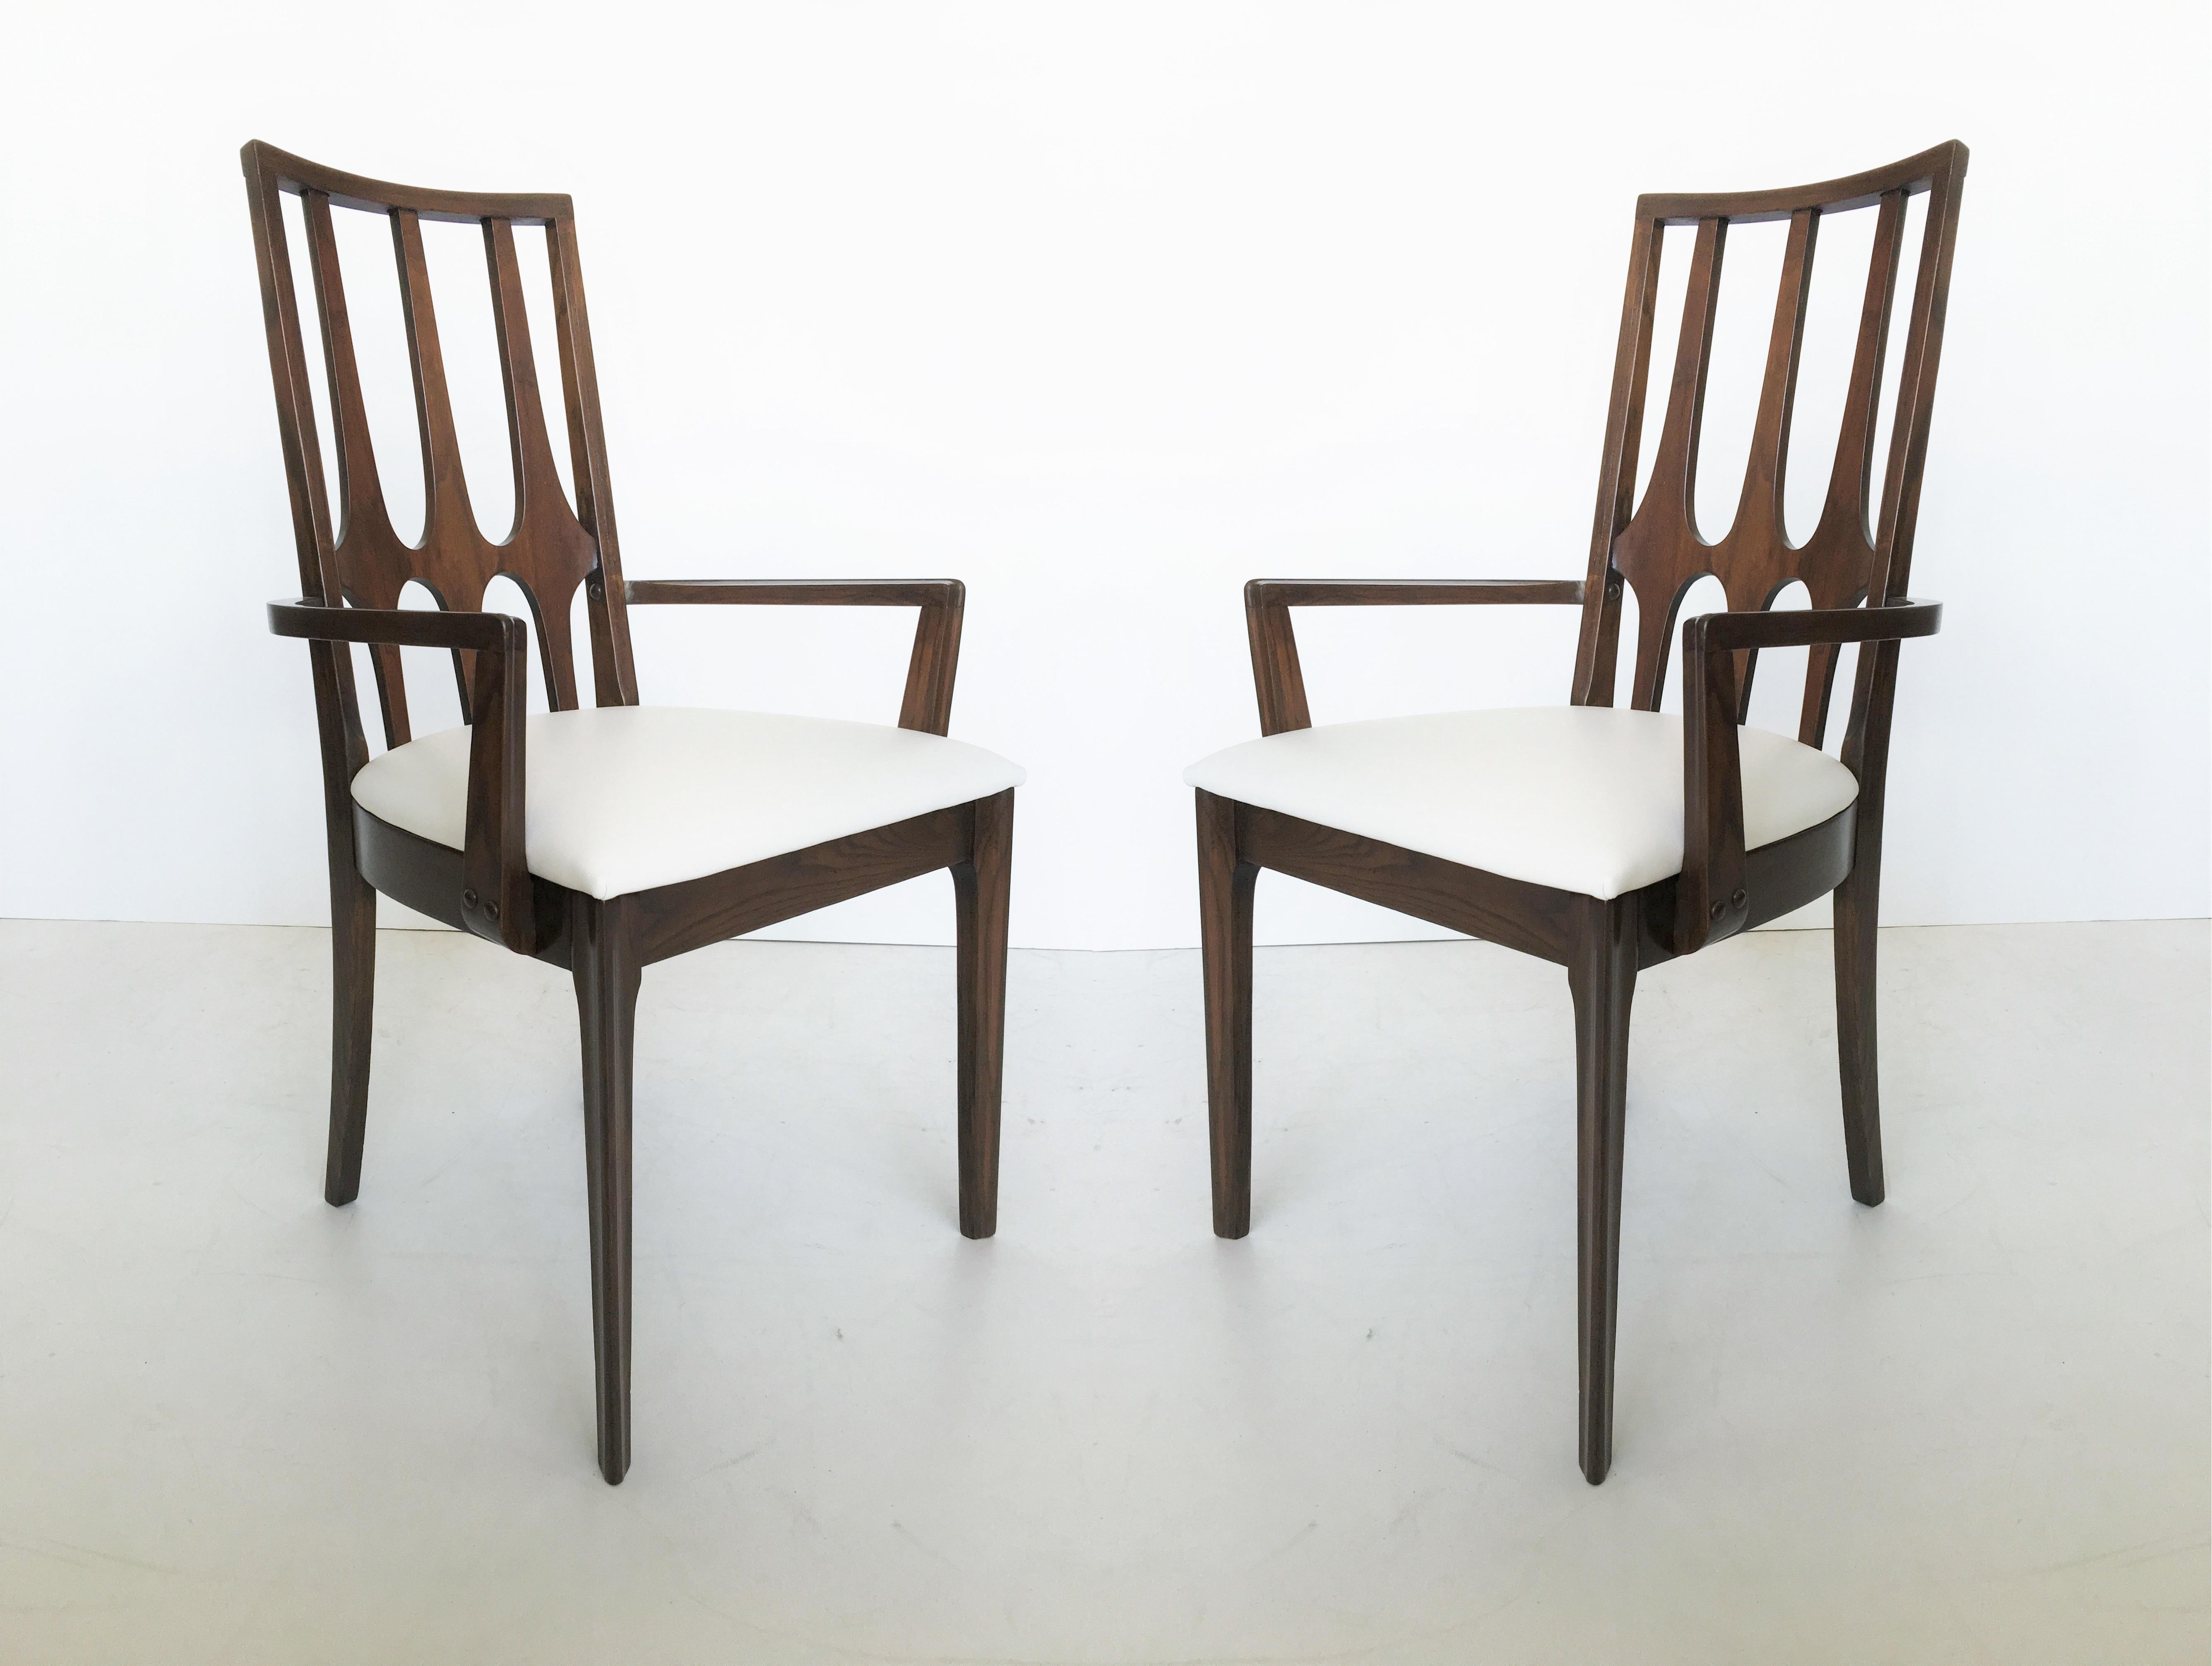 Set of 10 vintage walnut dining chairs manufactured by Broyhill for the Brasilia collection, circa early 1960s. It is such a unique design based upon a world-class architect designs for the then new city of Brasila, the 